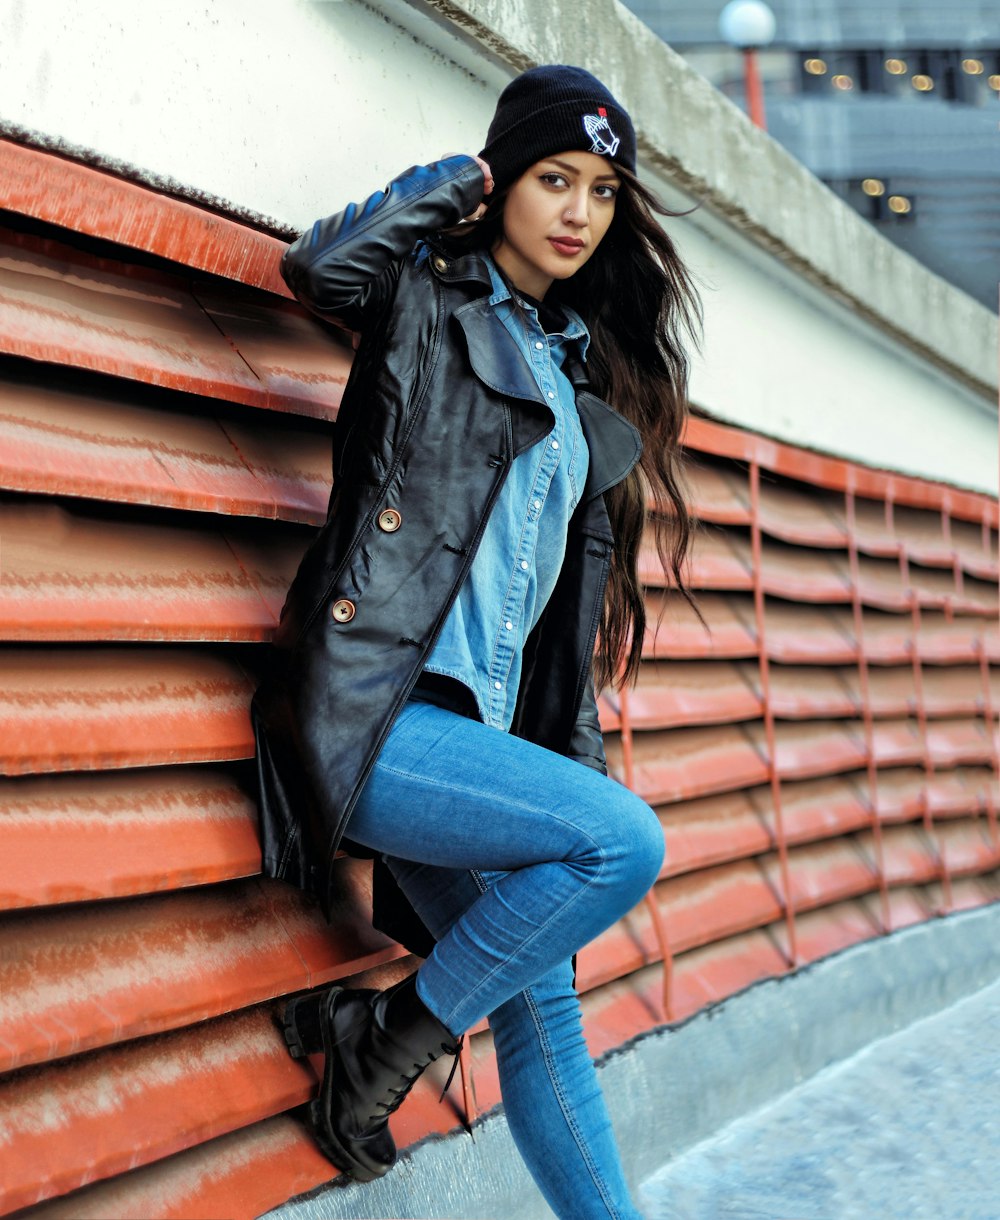 Woman in black leather jacket and blue denim jeans leaning on wall photo –  Free Iranian people Image on Unsplash